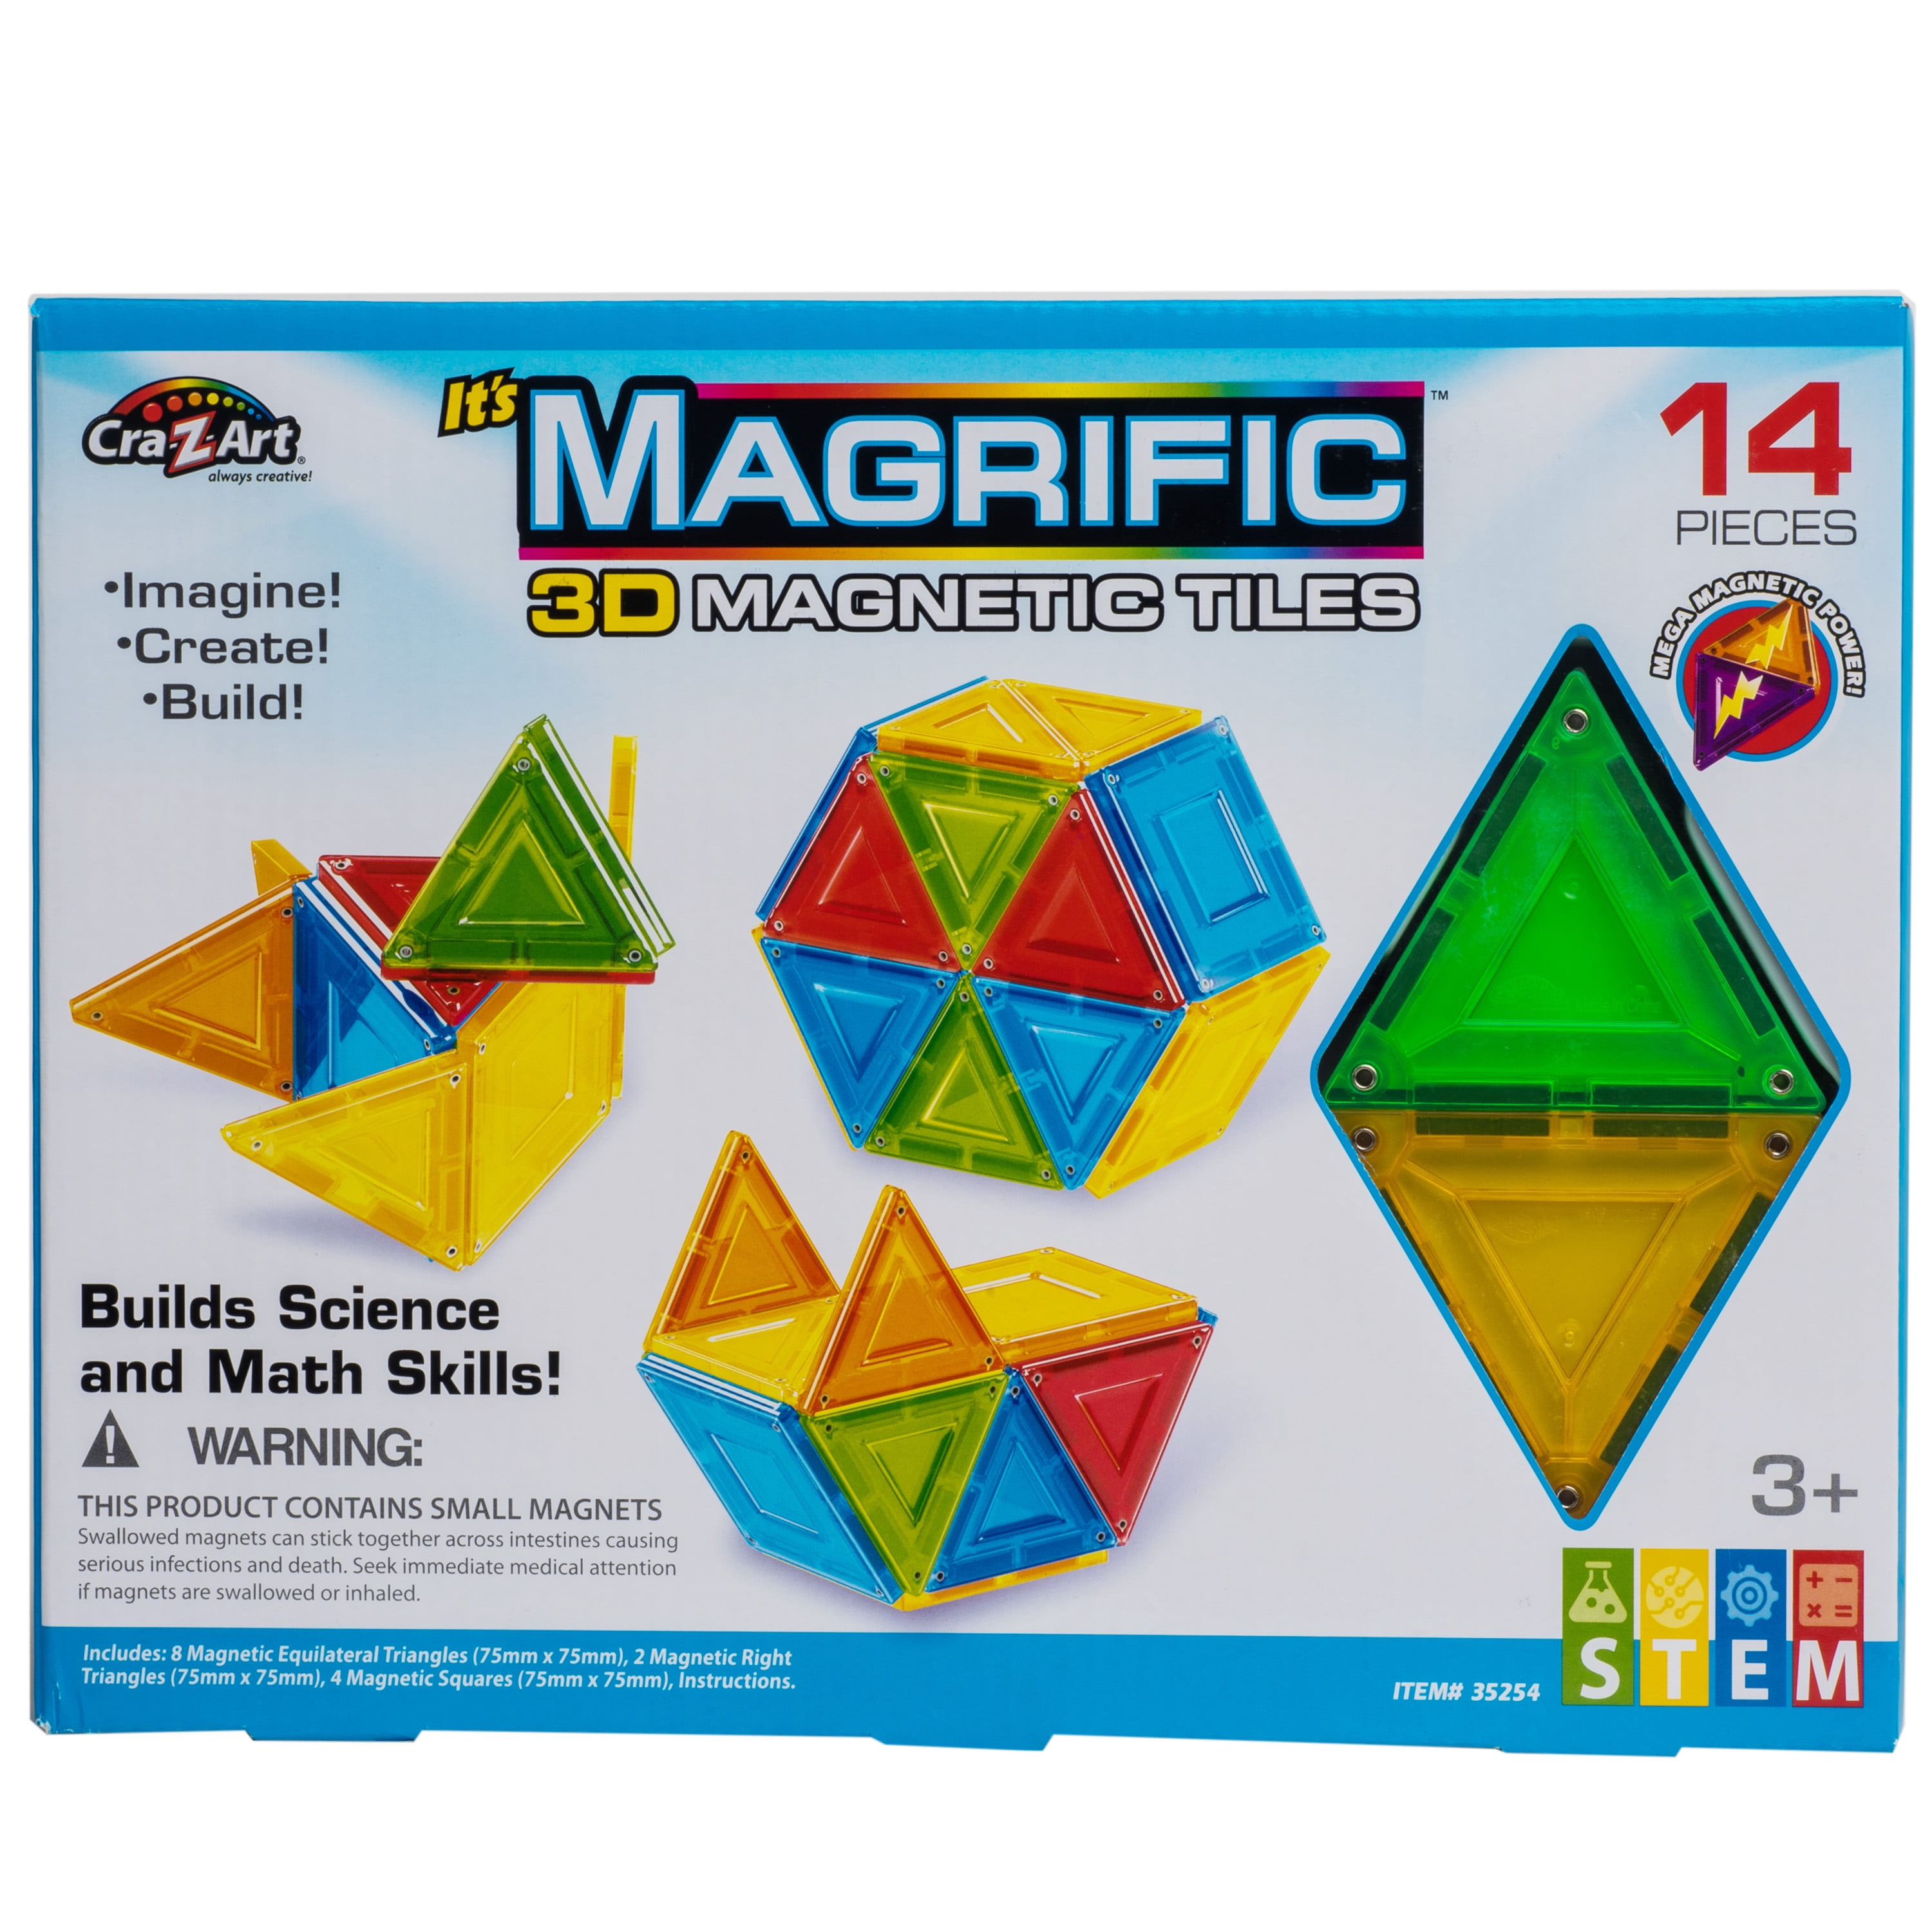 Tinker Toys Buildable Magnets Boredom Relief for Office Work Brain-Building Marble Puzzles for Logic & Creativity Travel & Studying 